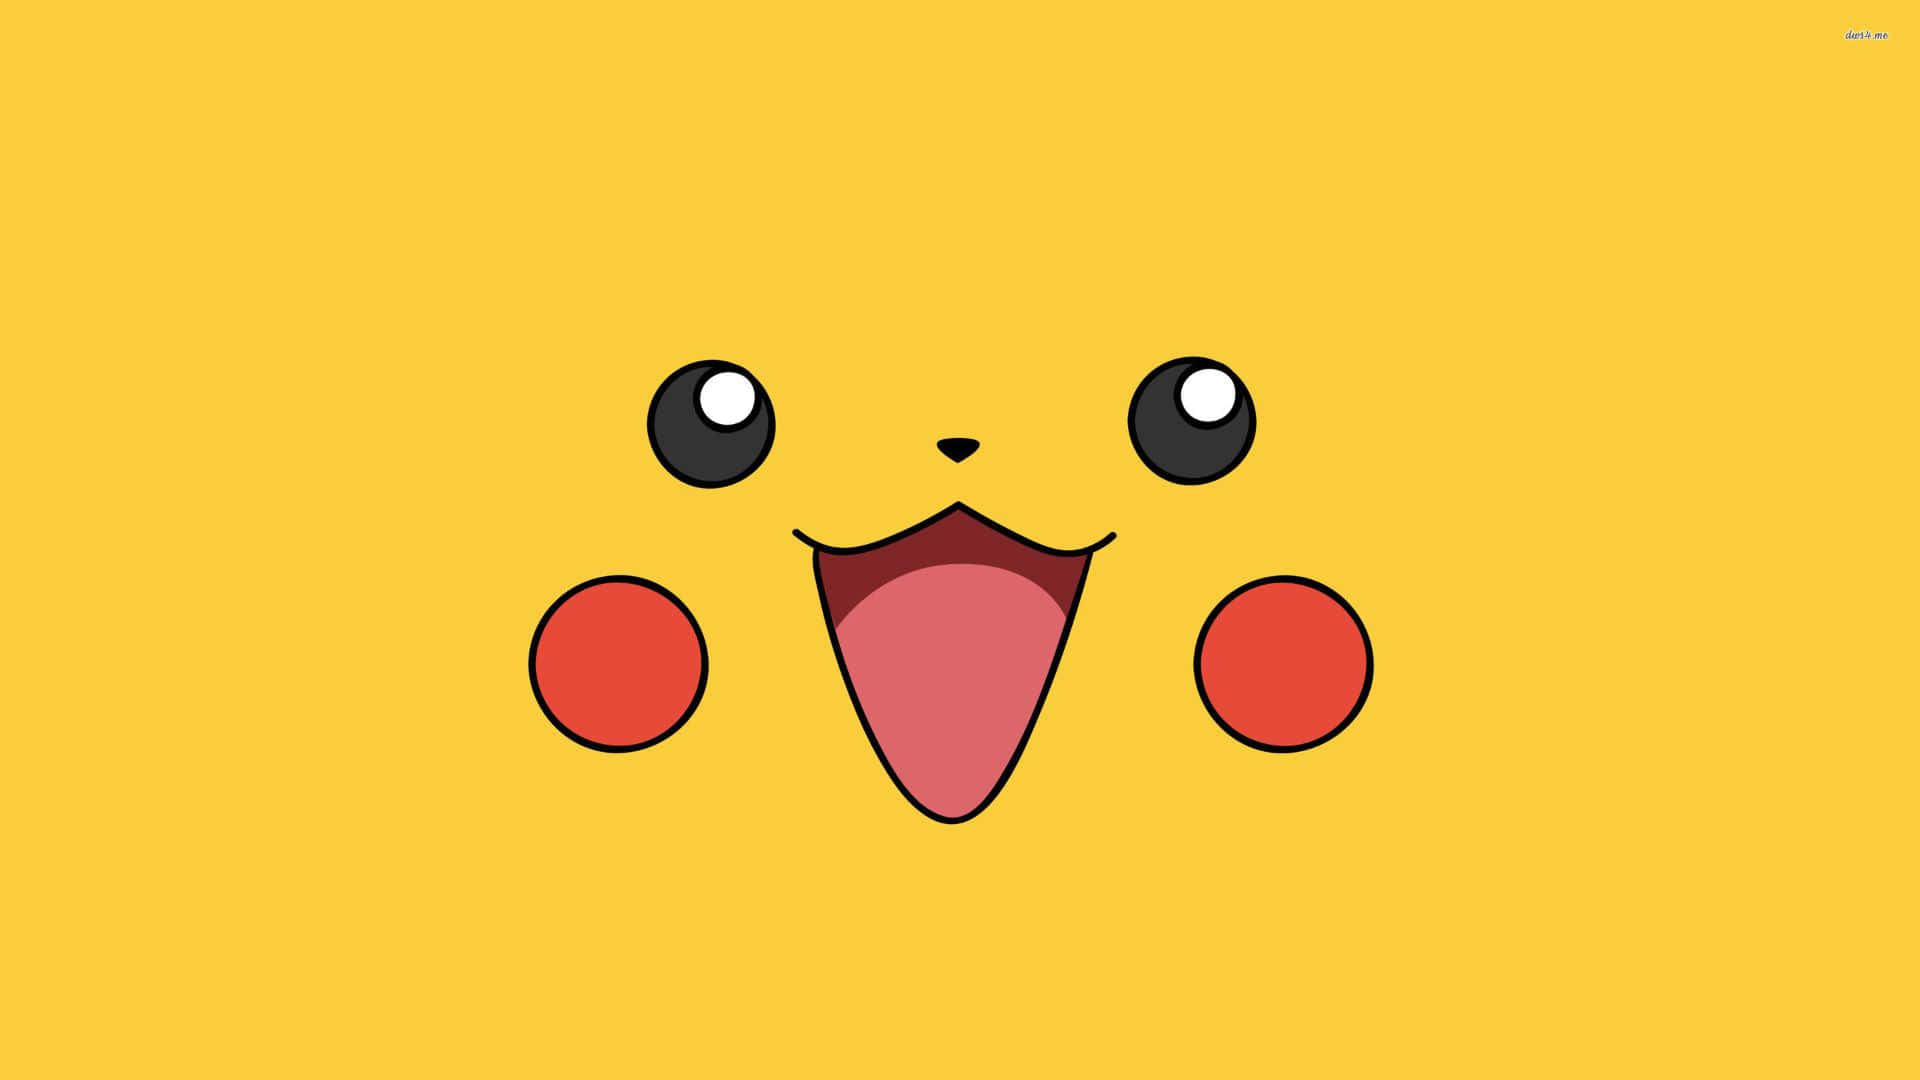 Get electrified with Pikachu!